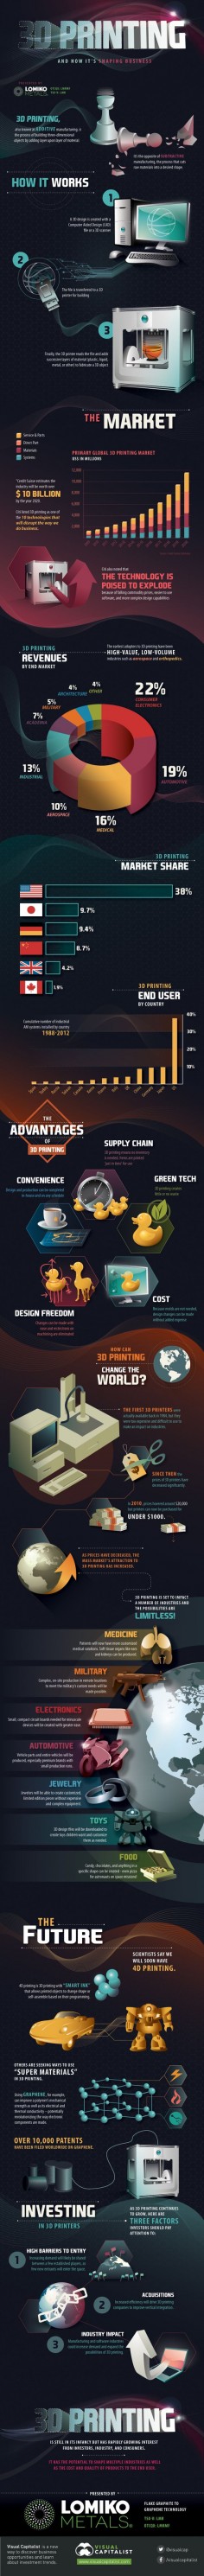 Awesome new 3D Printing Infograph